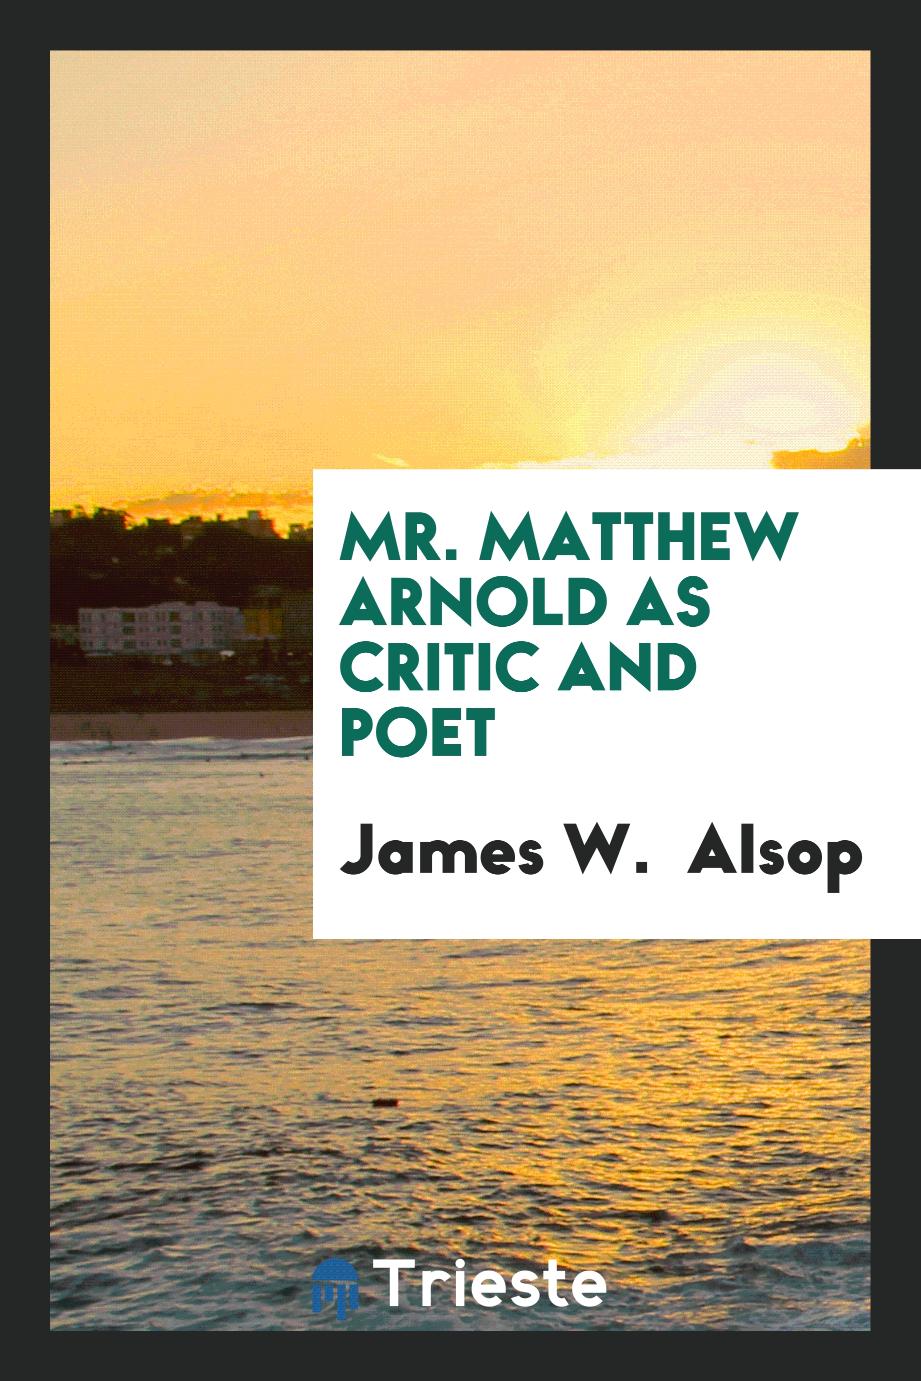 Mr. Matthew Arnold as Critic and Poet